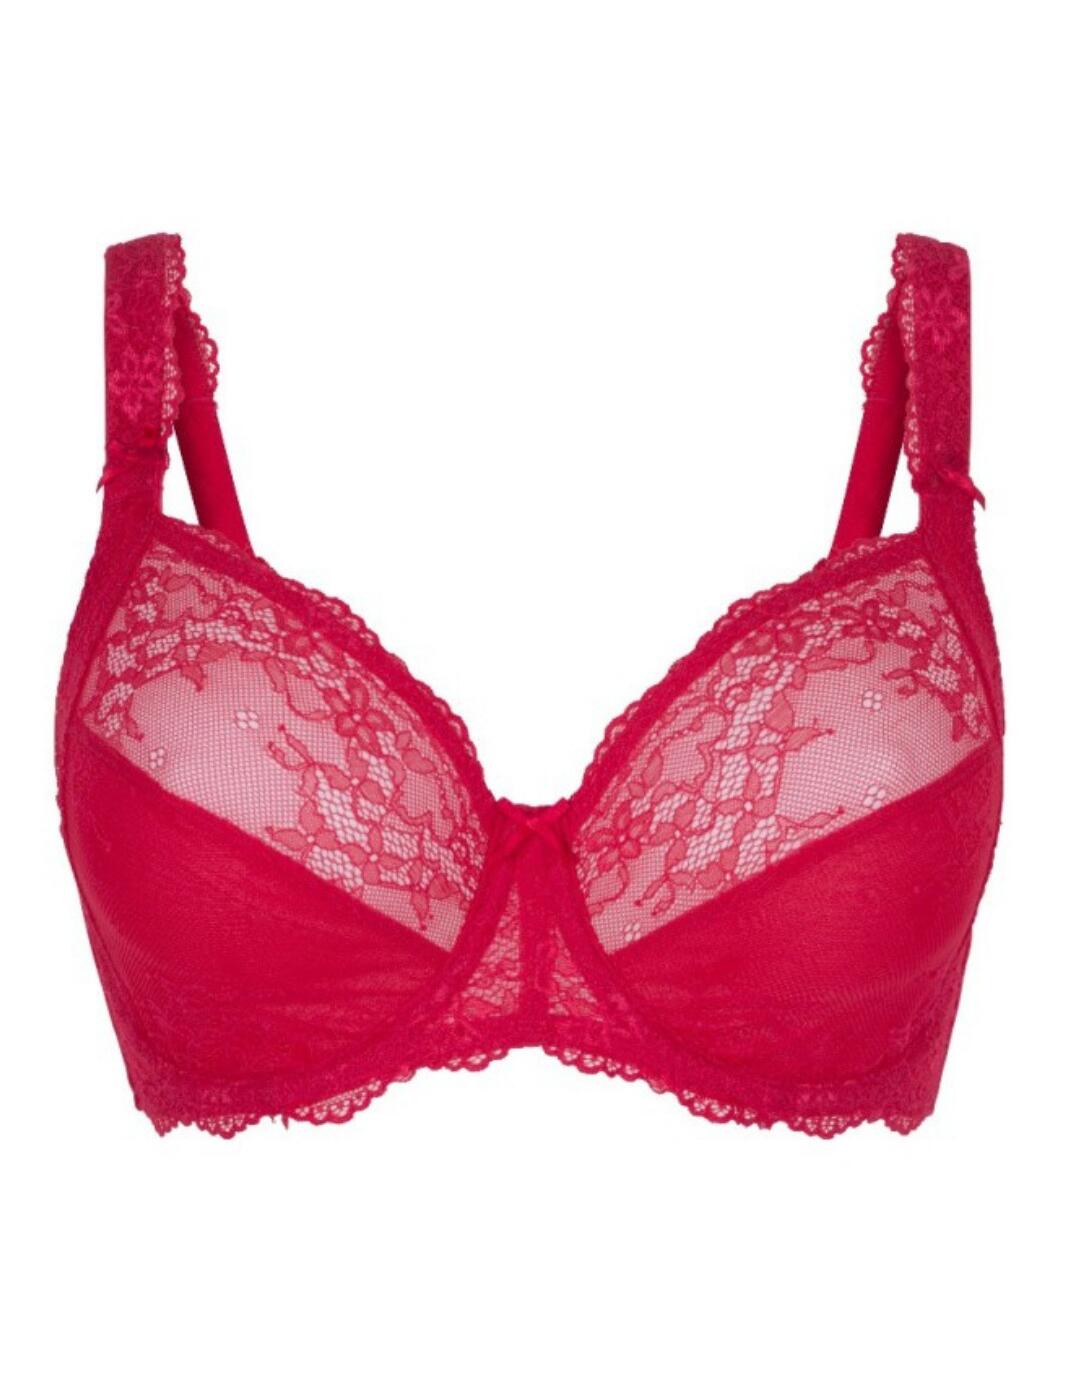 Lingadore Basic Collection Full Coverage Lace Bra - Belle Lingerie